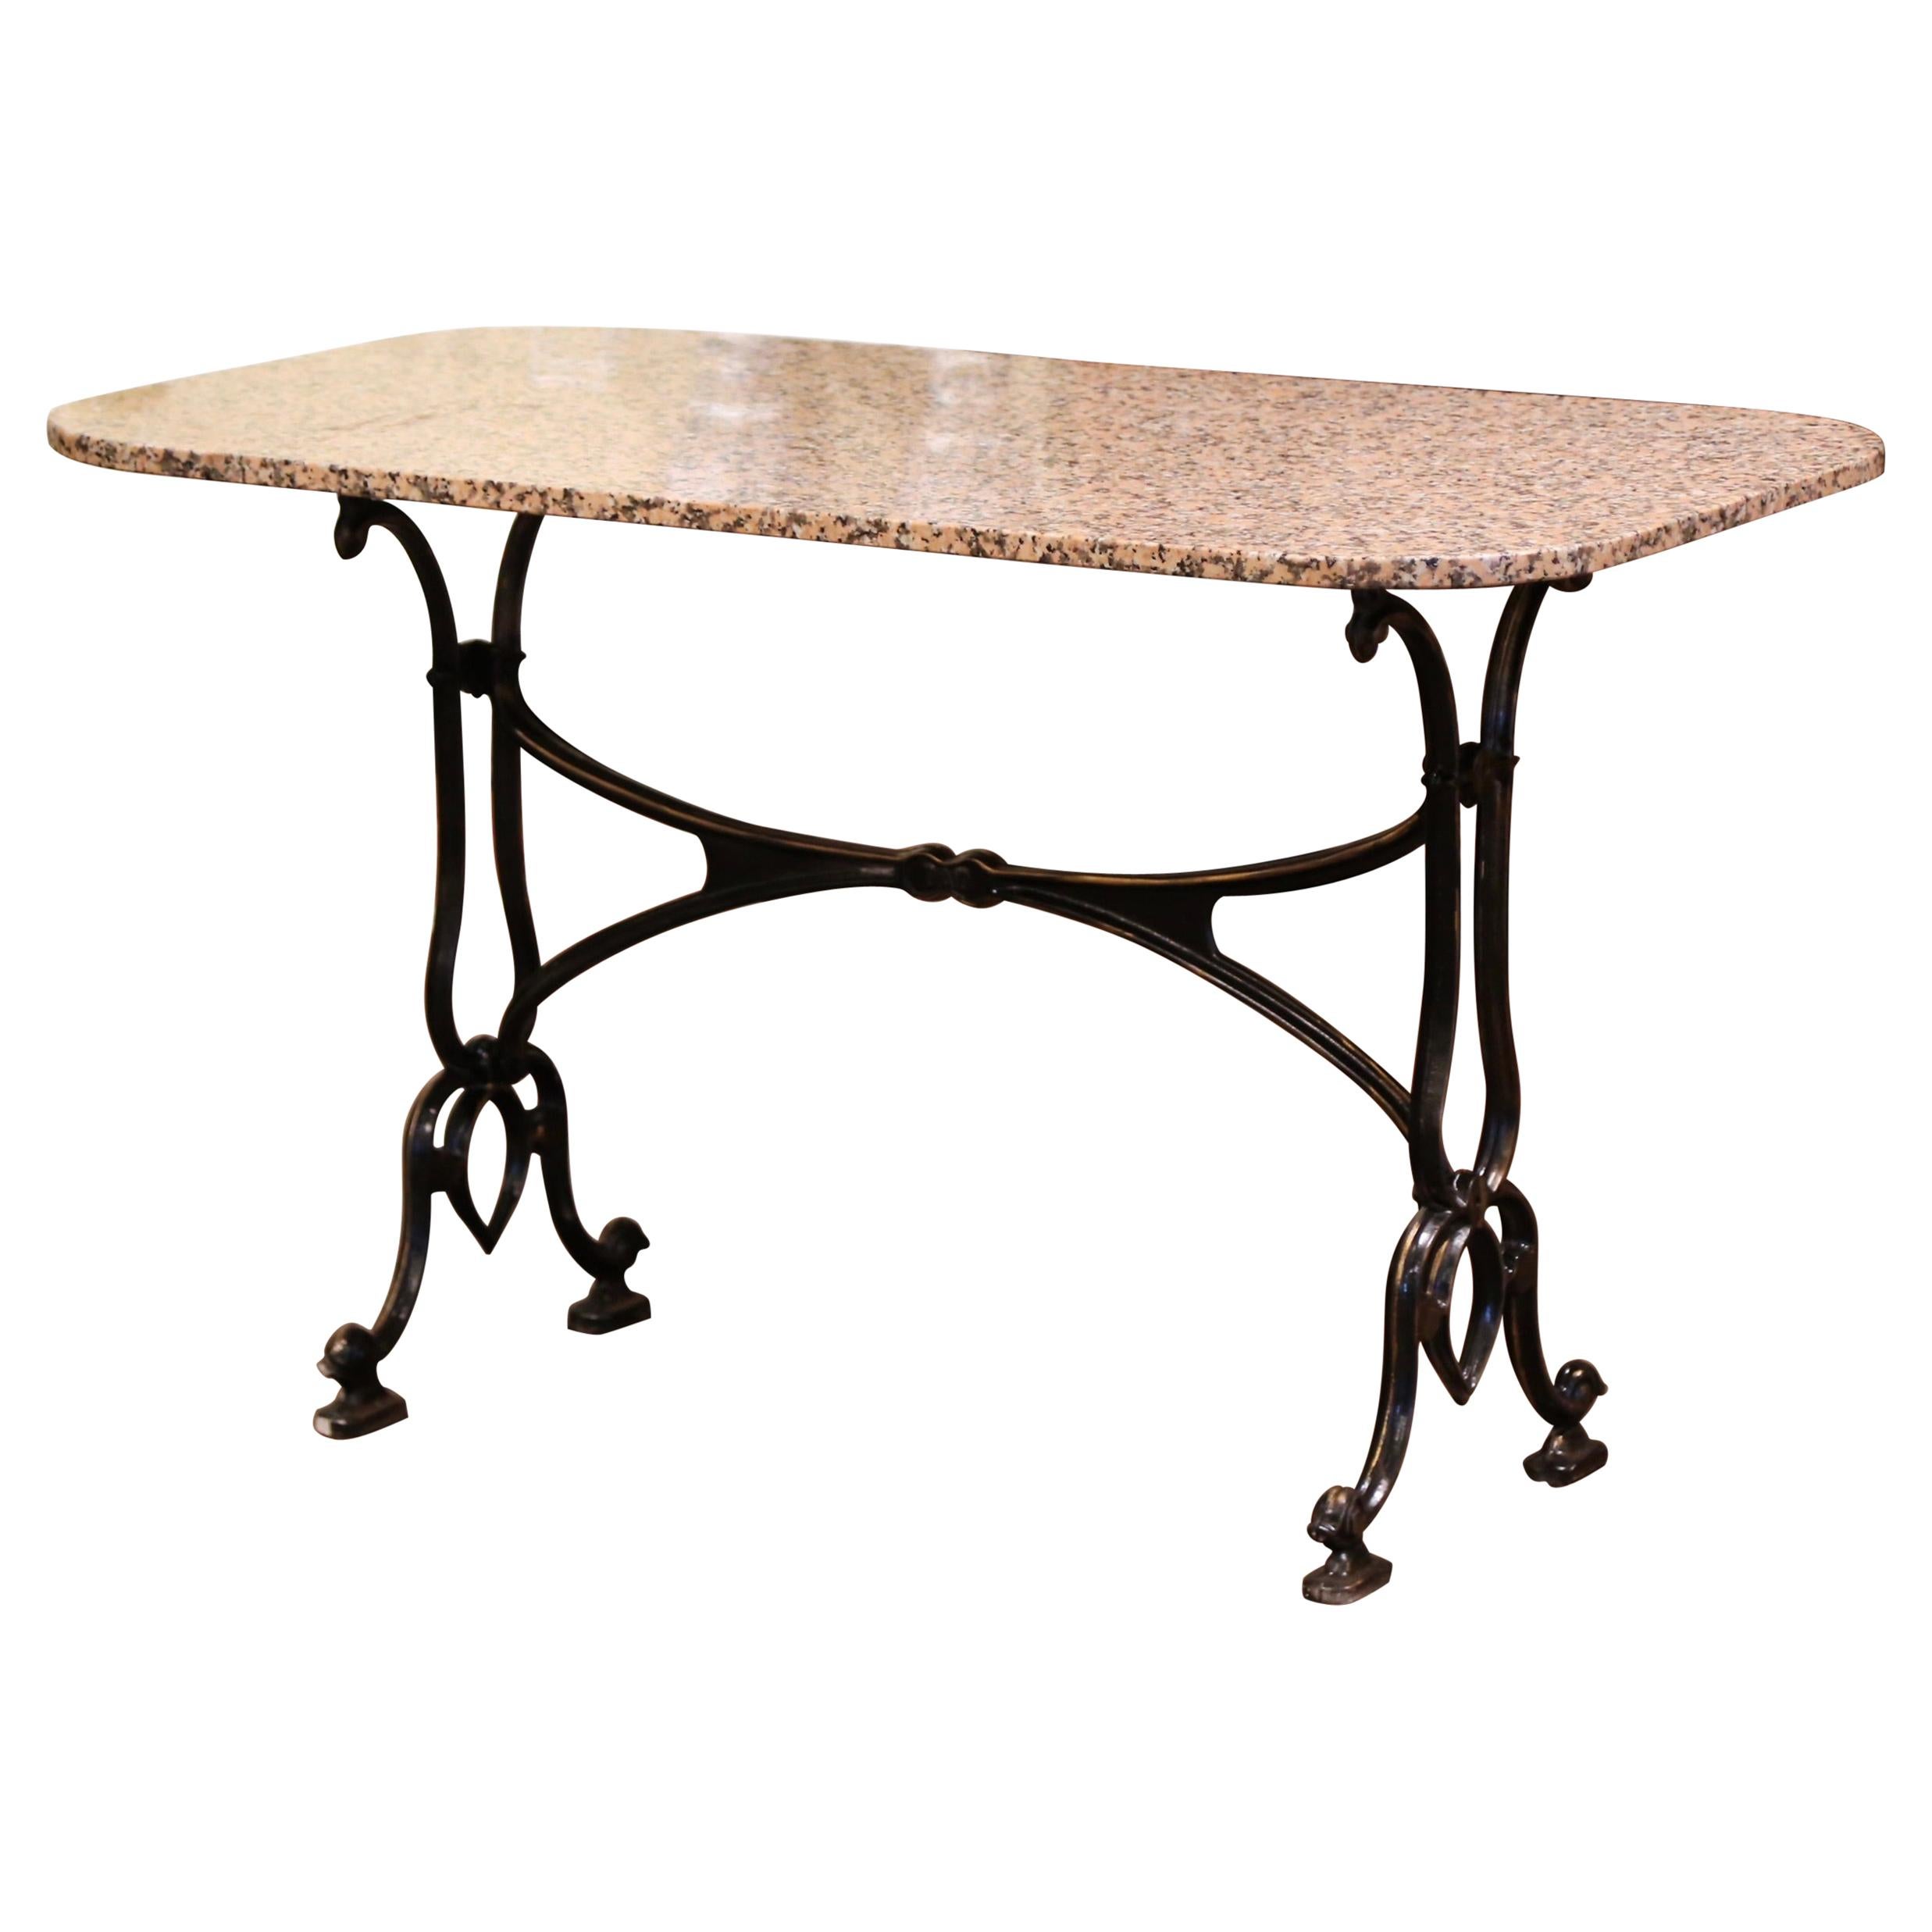 Early 20th Century French Parisian Painted Iron and Granite-Top Bistrot Table